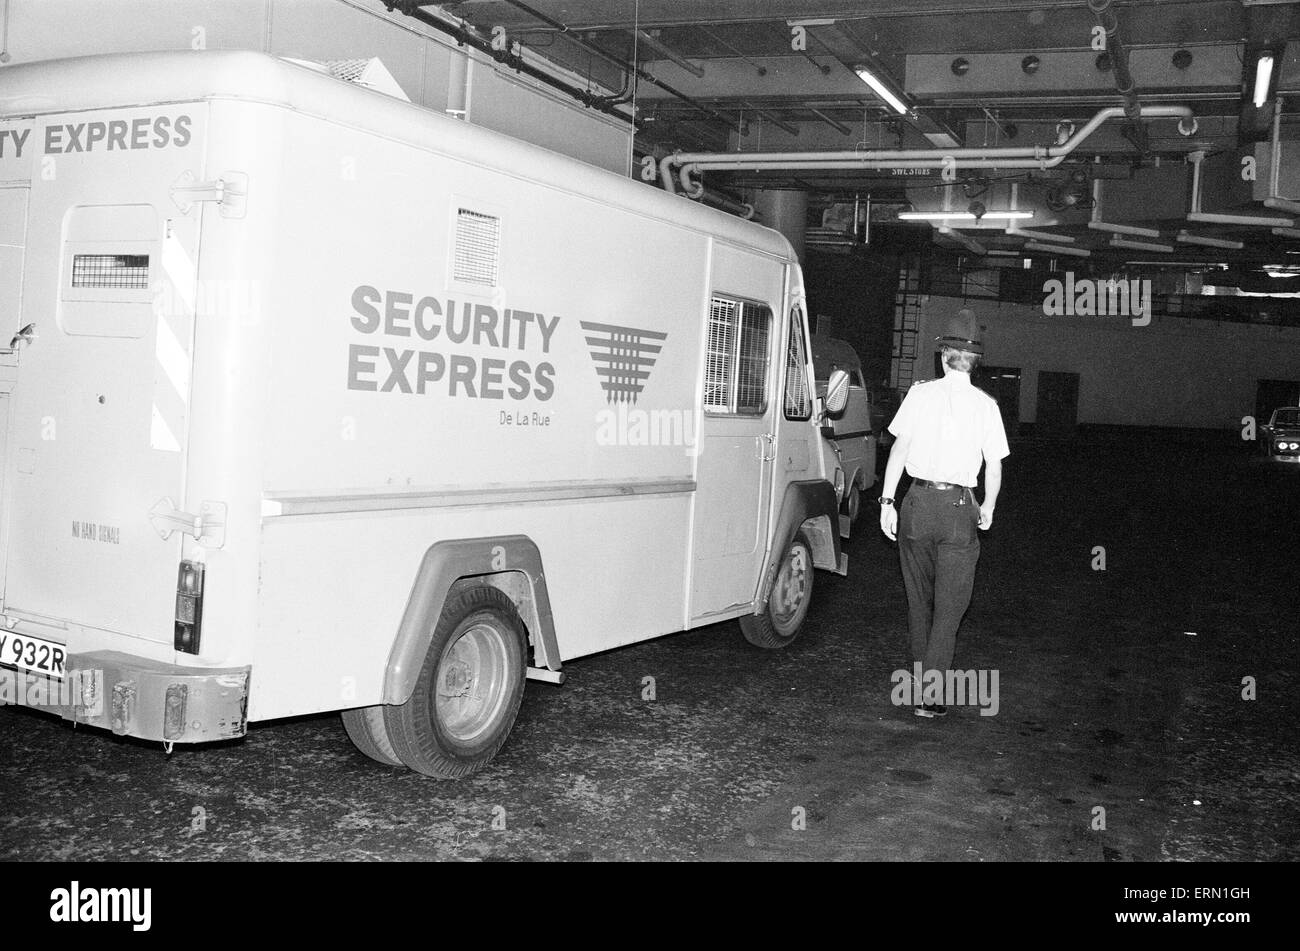 Armed Robbery committed at Daily Mirror Headquarters in Holborn, London, 31st May 1978. Two robbers attacked Security Express Van, stealing nearly £200,000. Shots fired, point blank range, cold blooded killing of Security Guard Tony Castra, married father aged 38 years old. Stock Photo